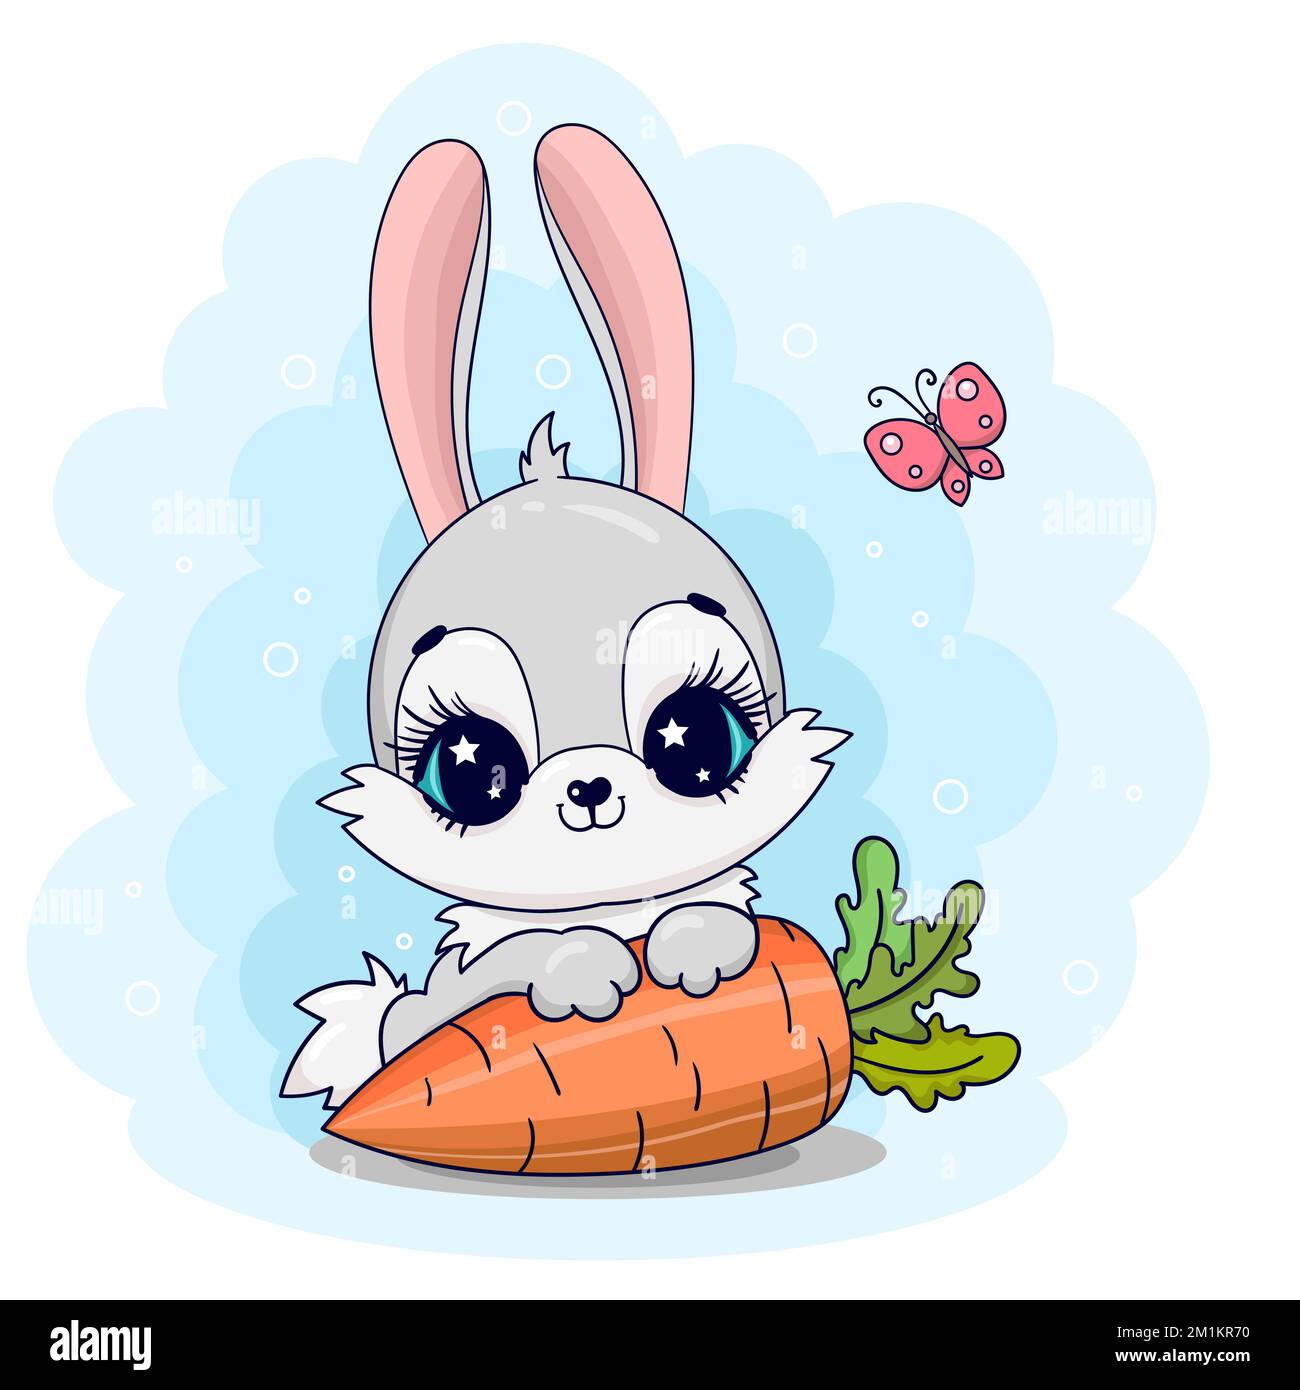 Cute little rabbit with a carrot. Vector illustration. Stock Vector